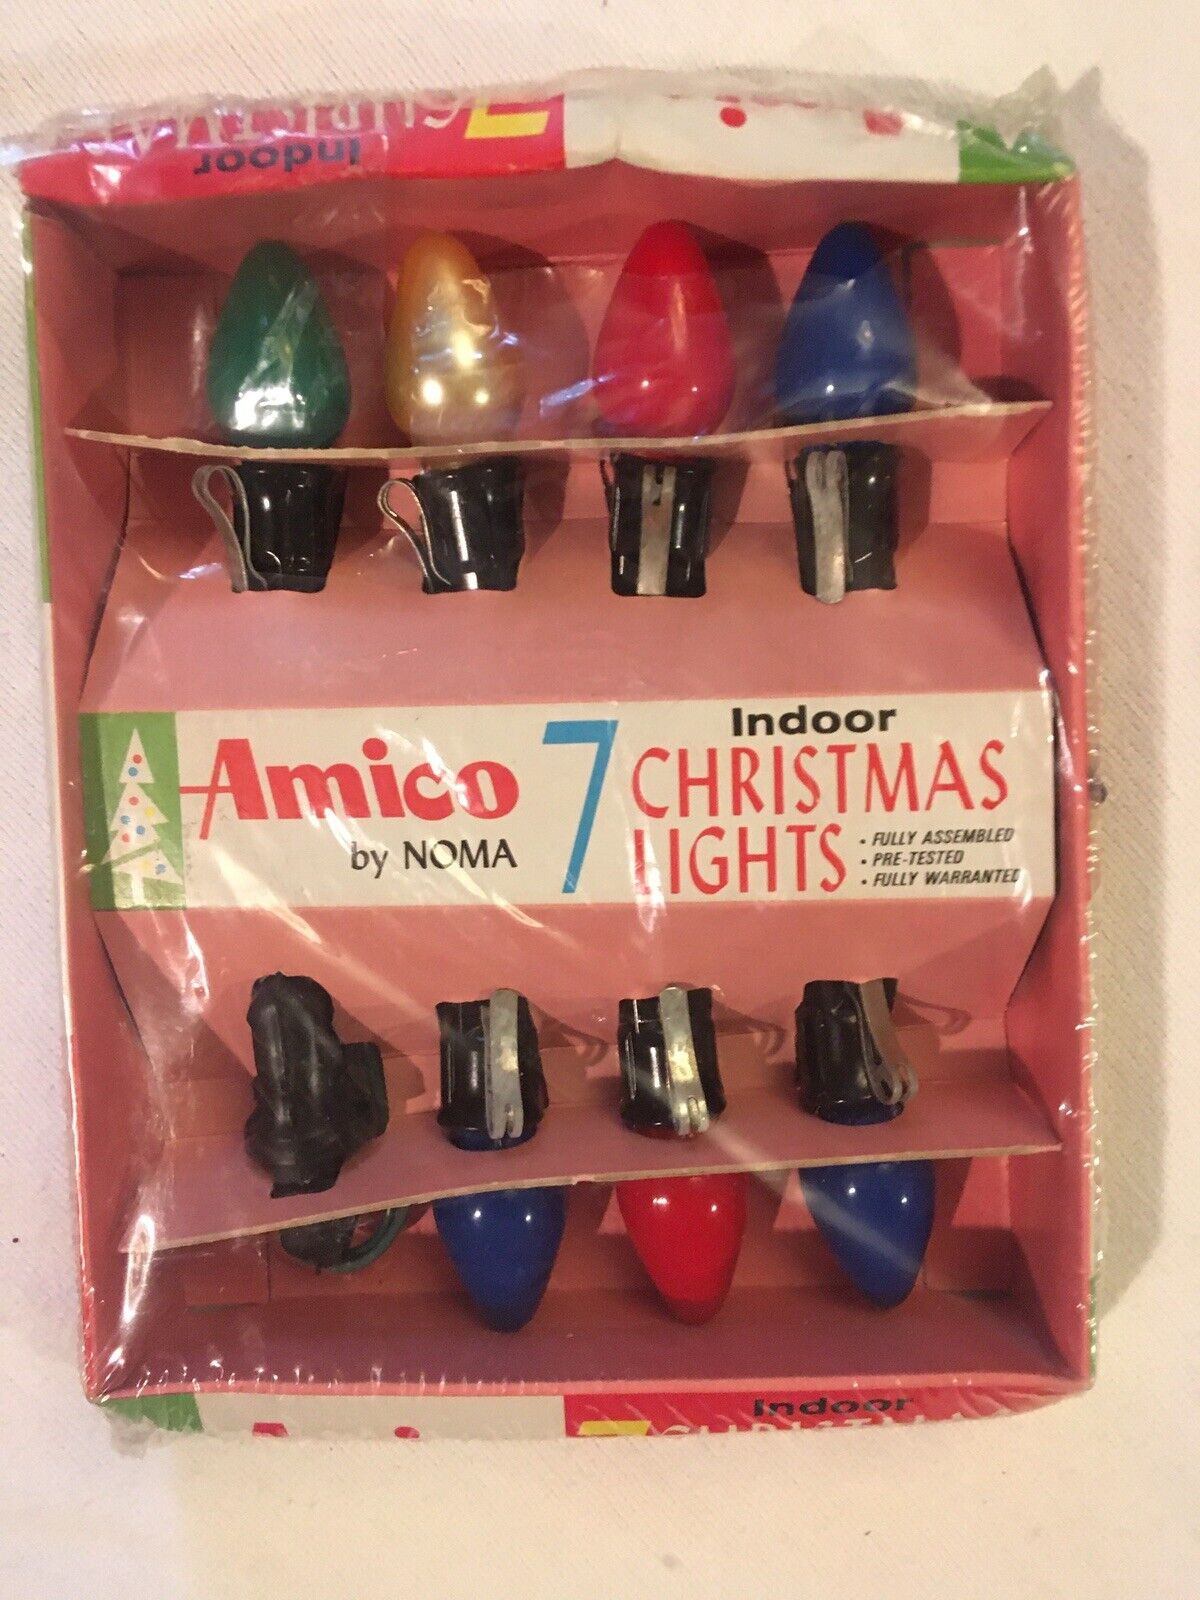 VTG NOS AMICO by NOMA Box Of 7 Christmas Lights Connectable Indoor NIP Untested